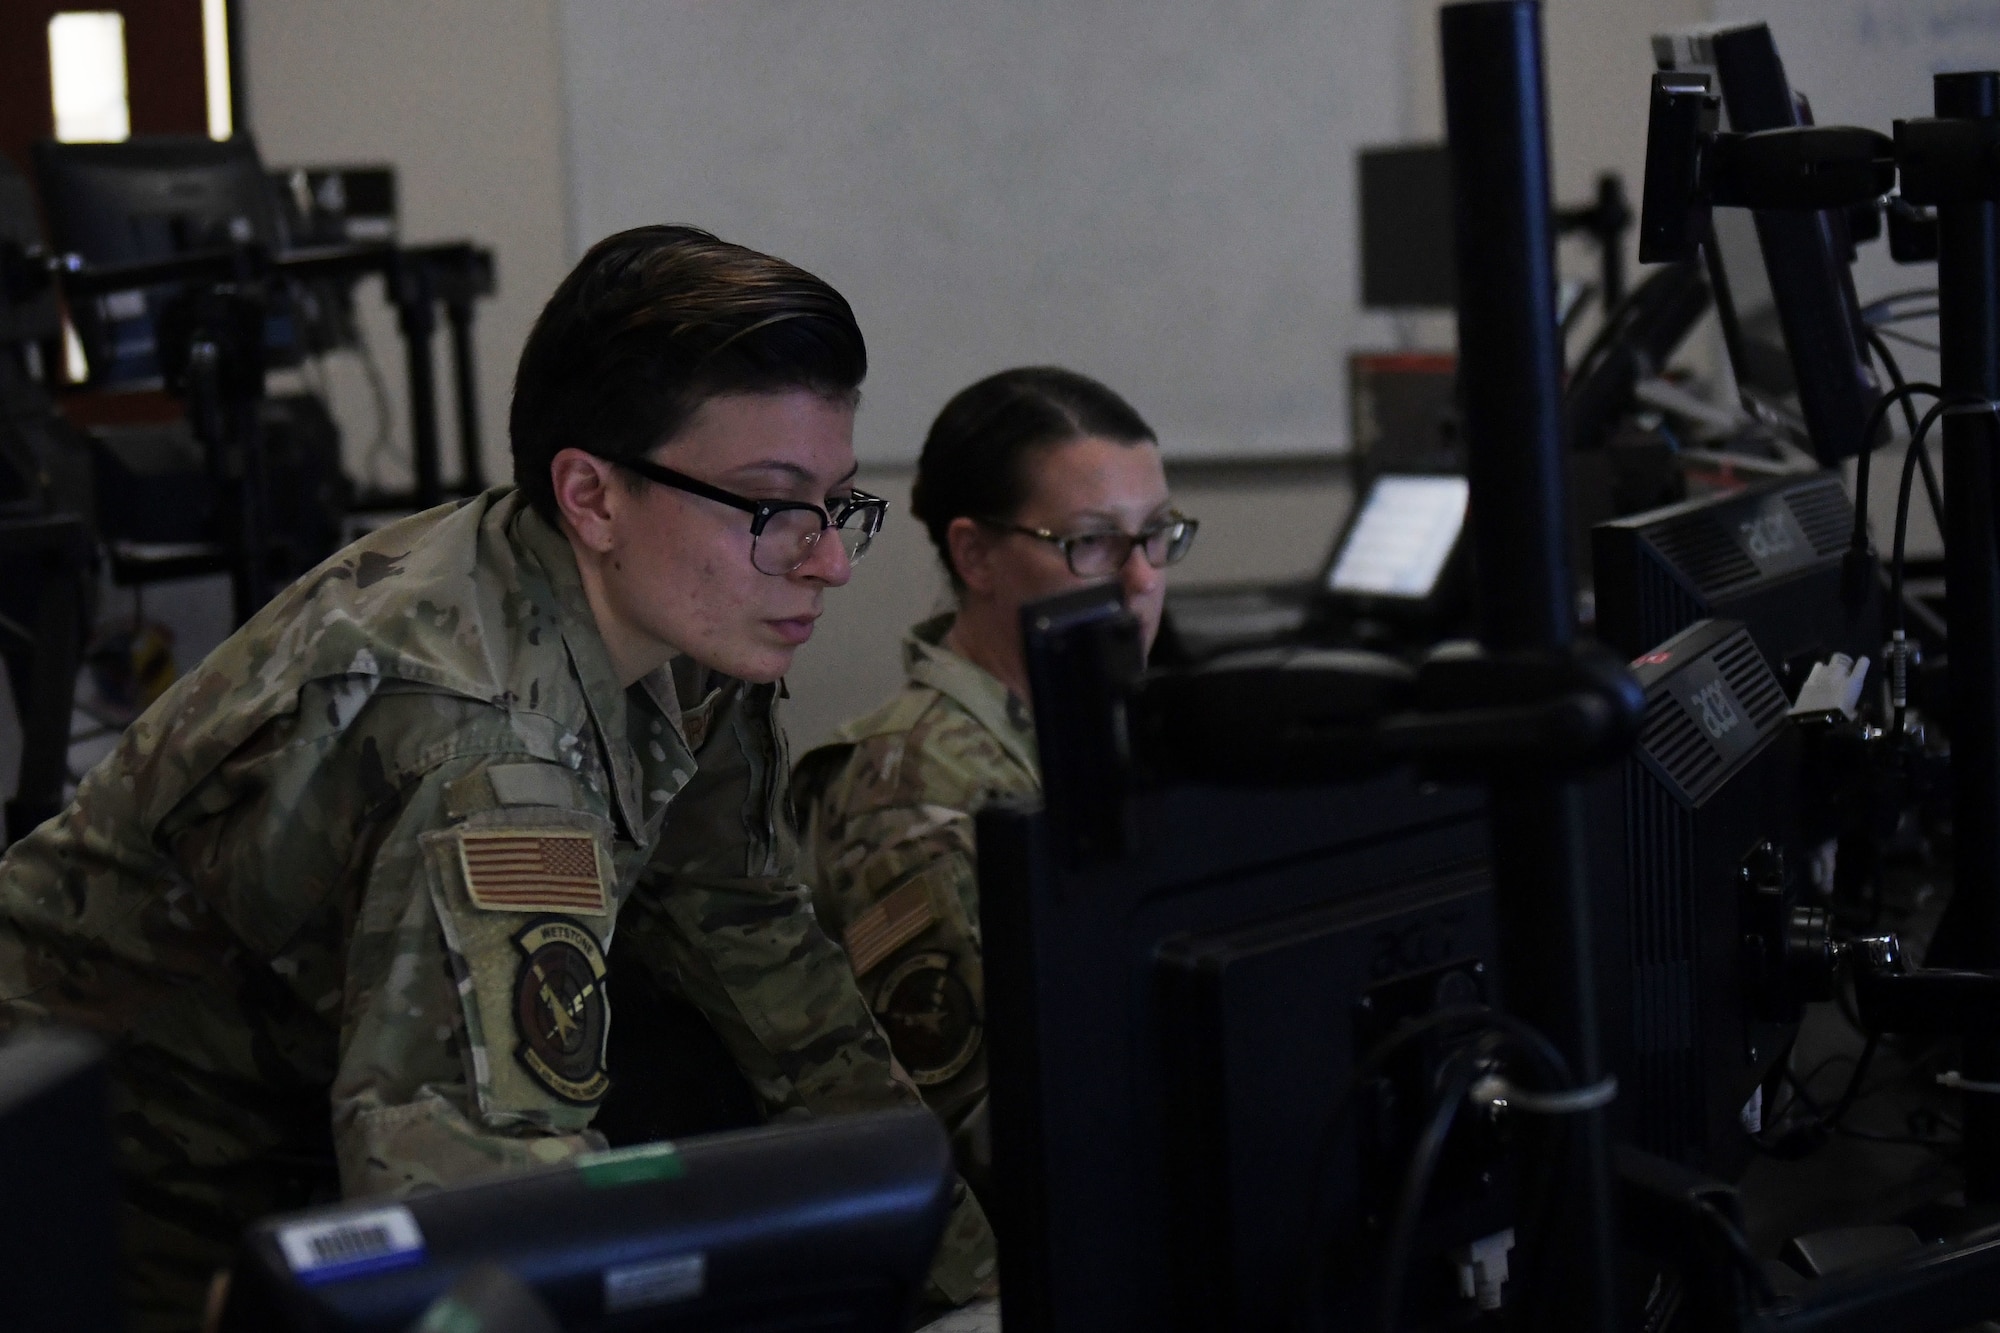 U.S. Air Force Senior Airman Megan Teran, left, 81st Air Control Squadron weapons director, and Master Sgt. Stephanie Leal, right, 81st ACS assistant operations superintendent, prepare for an exercise at Tyndall Air Force Base, Florida, March 29, 2022.